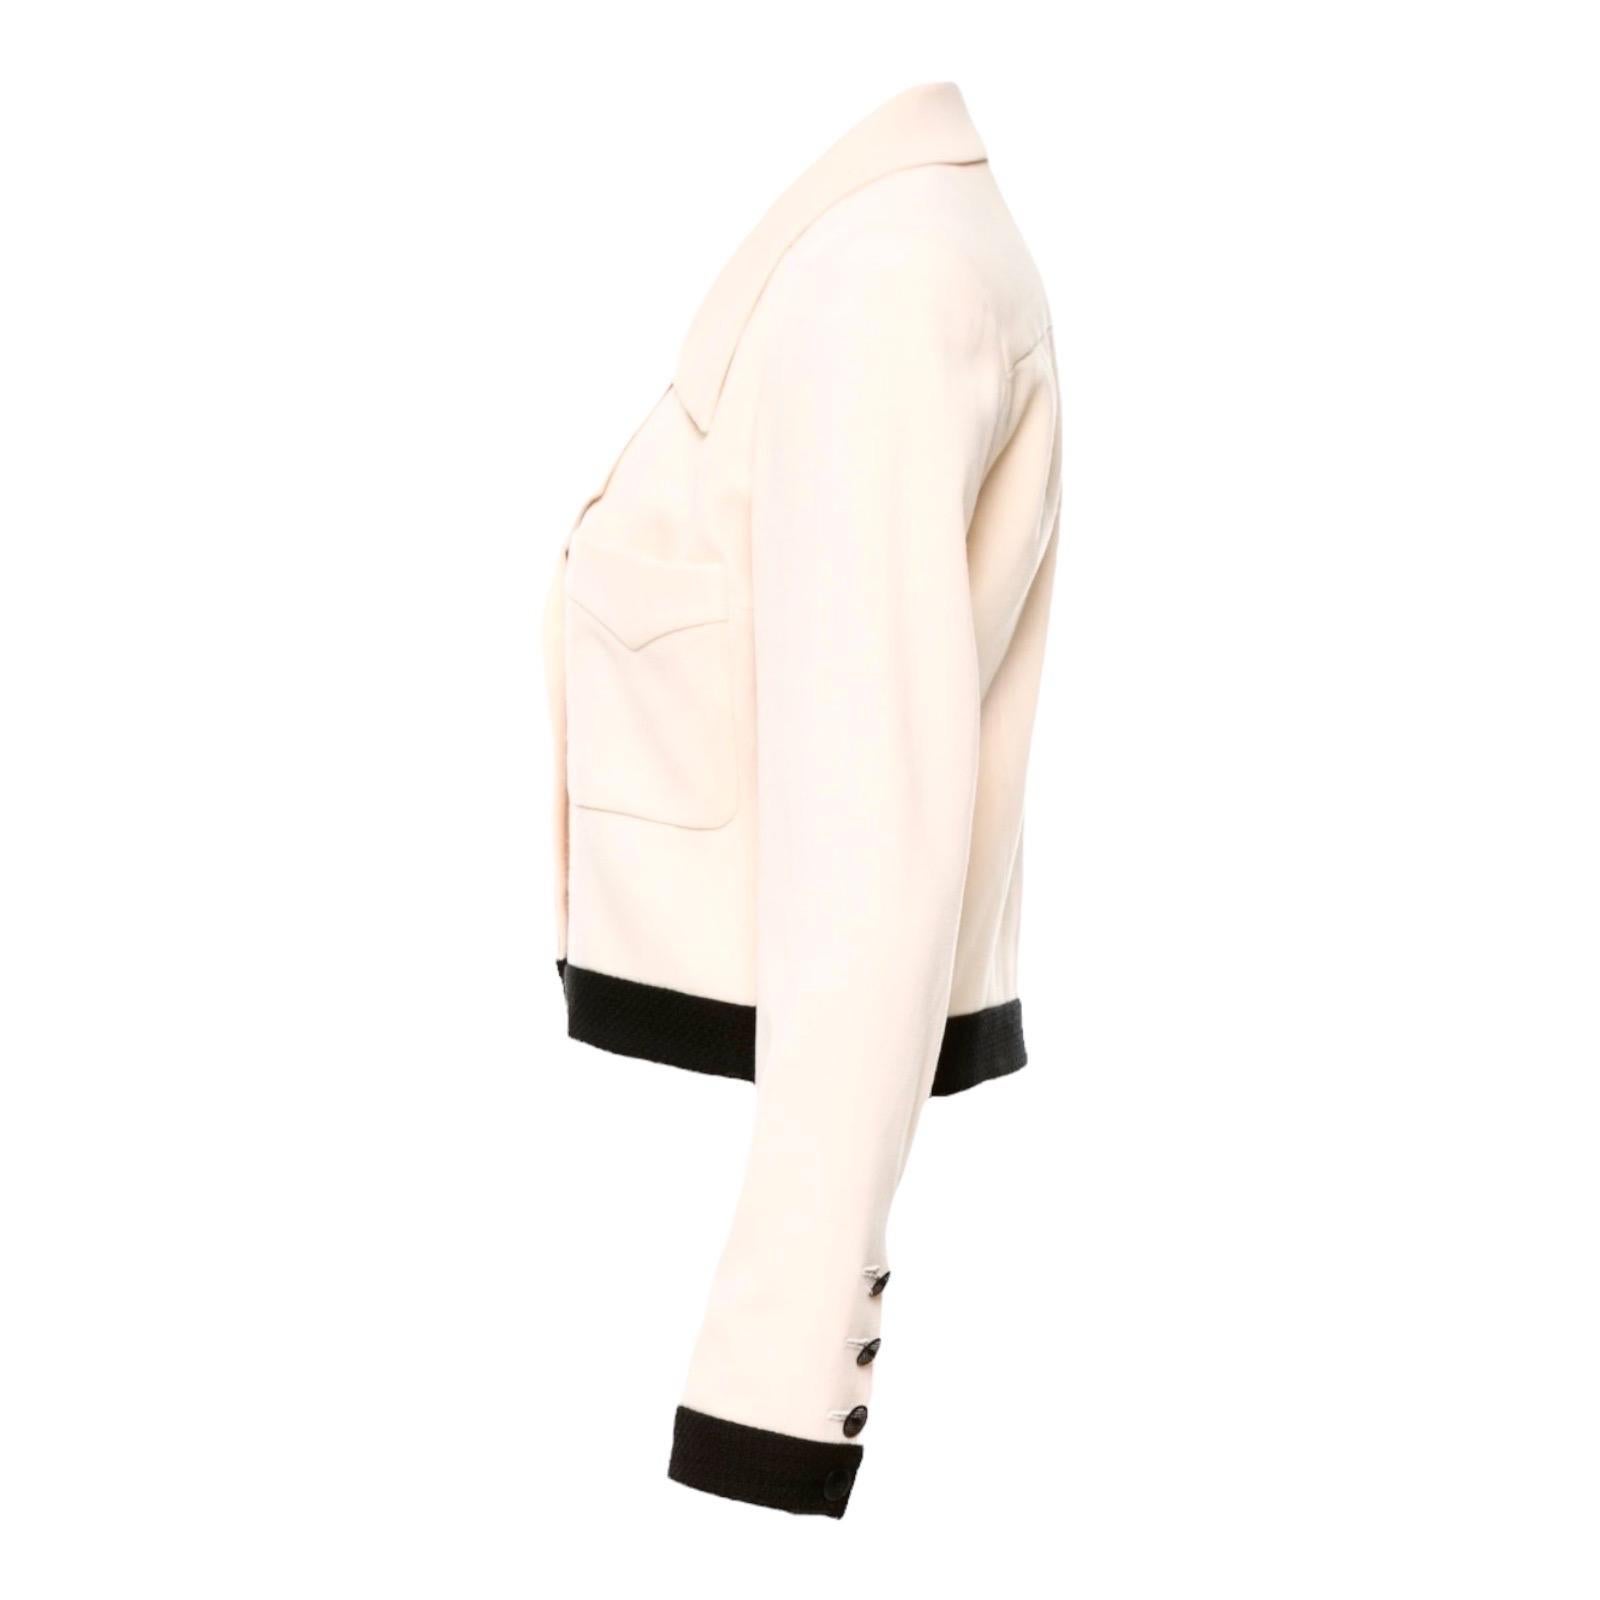 Stunning Piece by Chanel
Classic Jacket 
Chanel bi-color signature monochrome design
Fantastic light colored fabric 
Black tweed fabric trimmings
Two front pockets
Sleeves with Chanel CC logo buttons and real button holes
Fully lined with printed